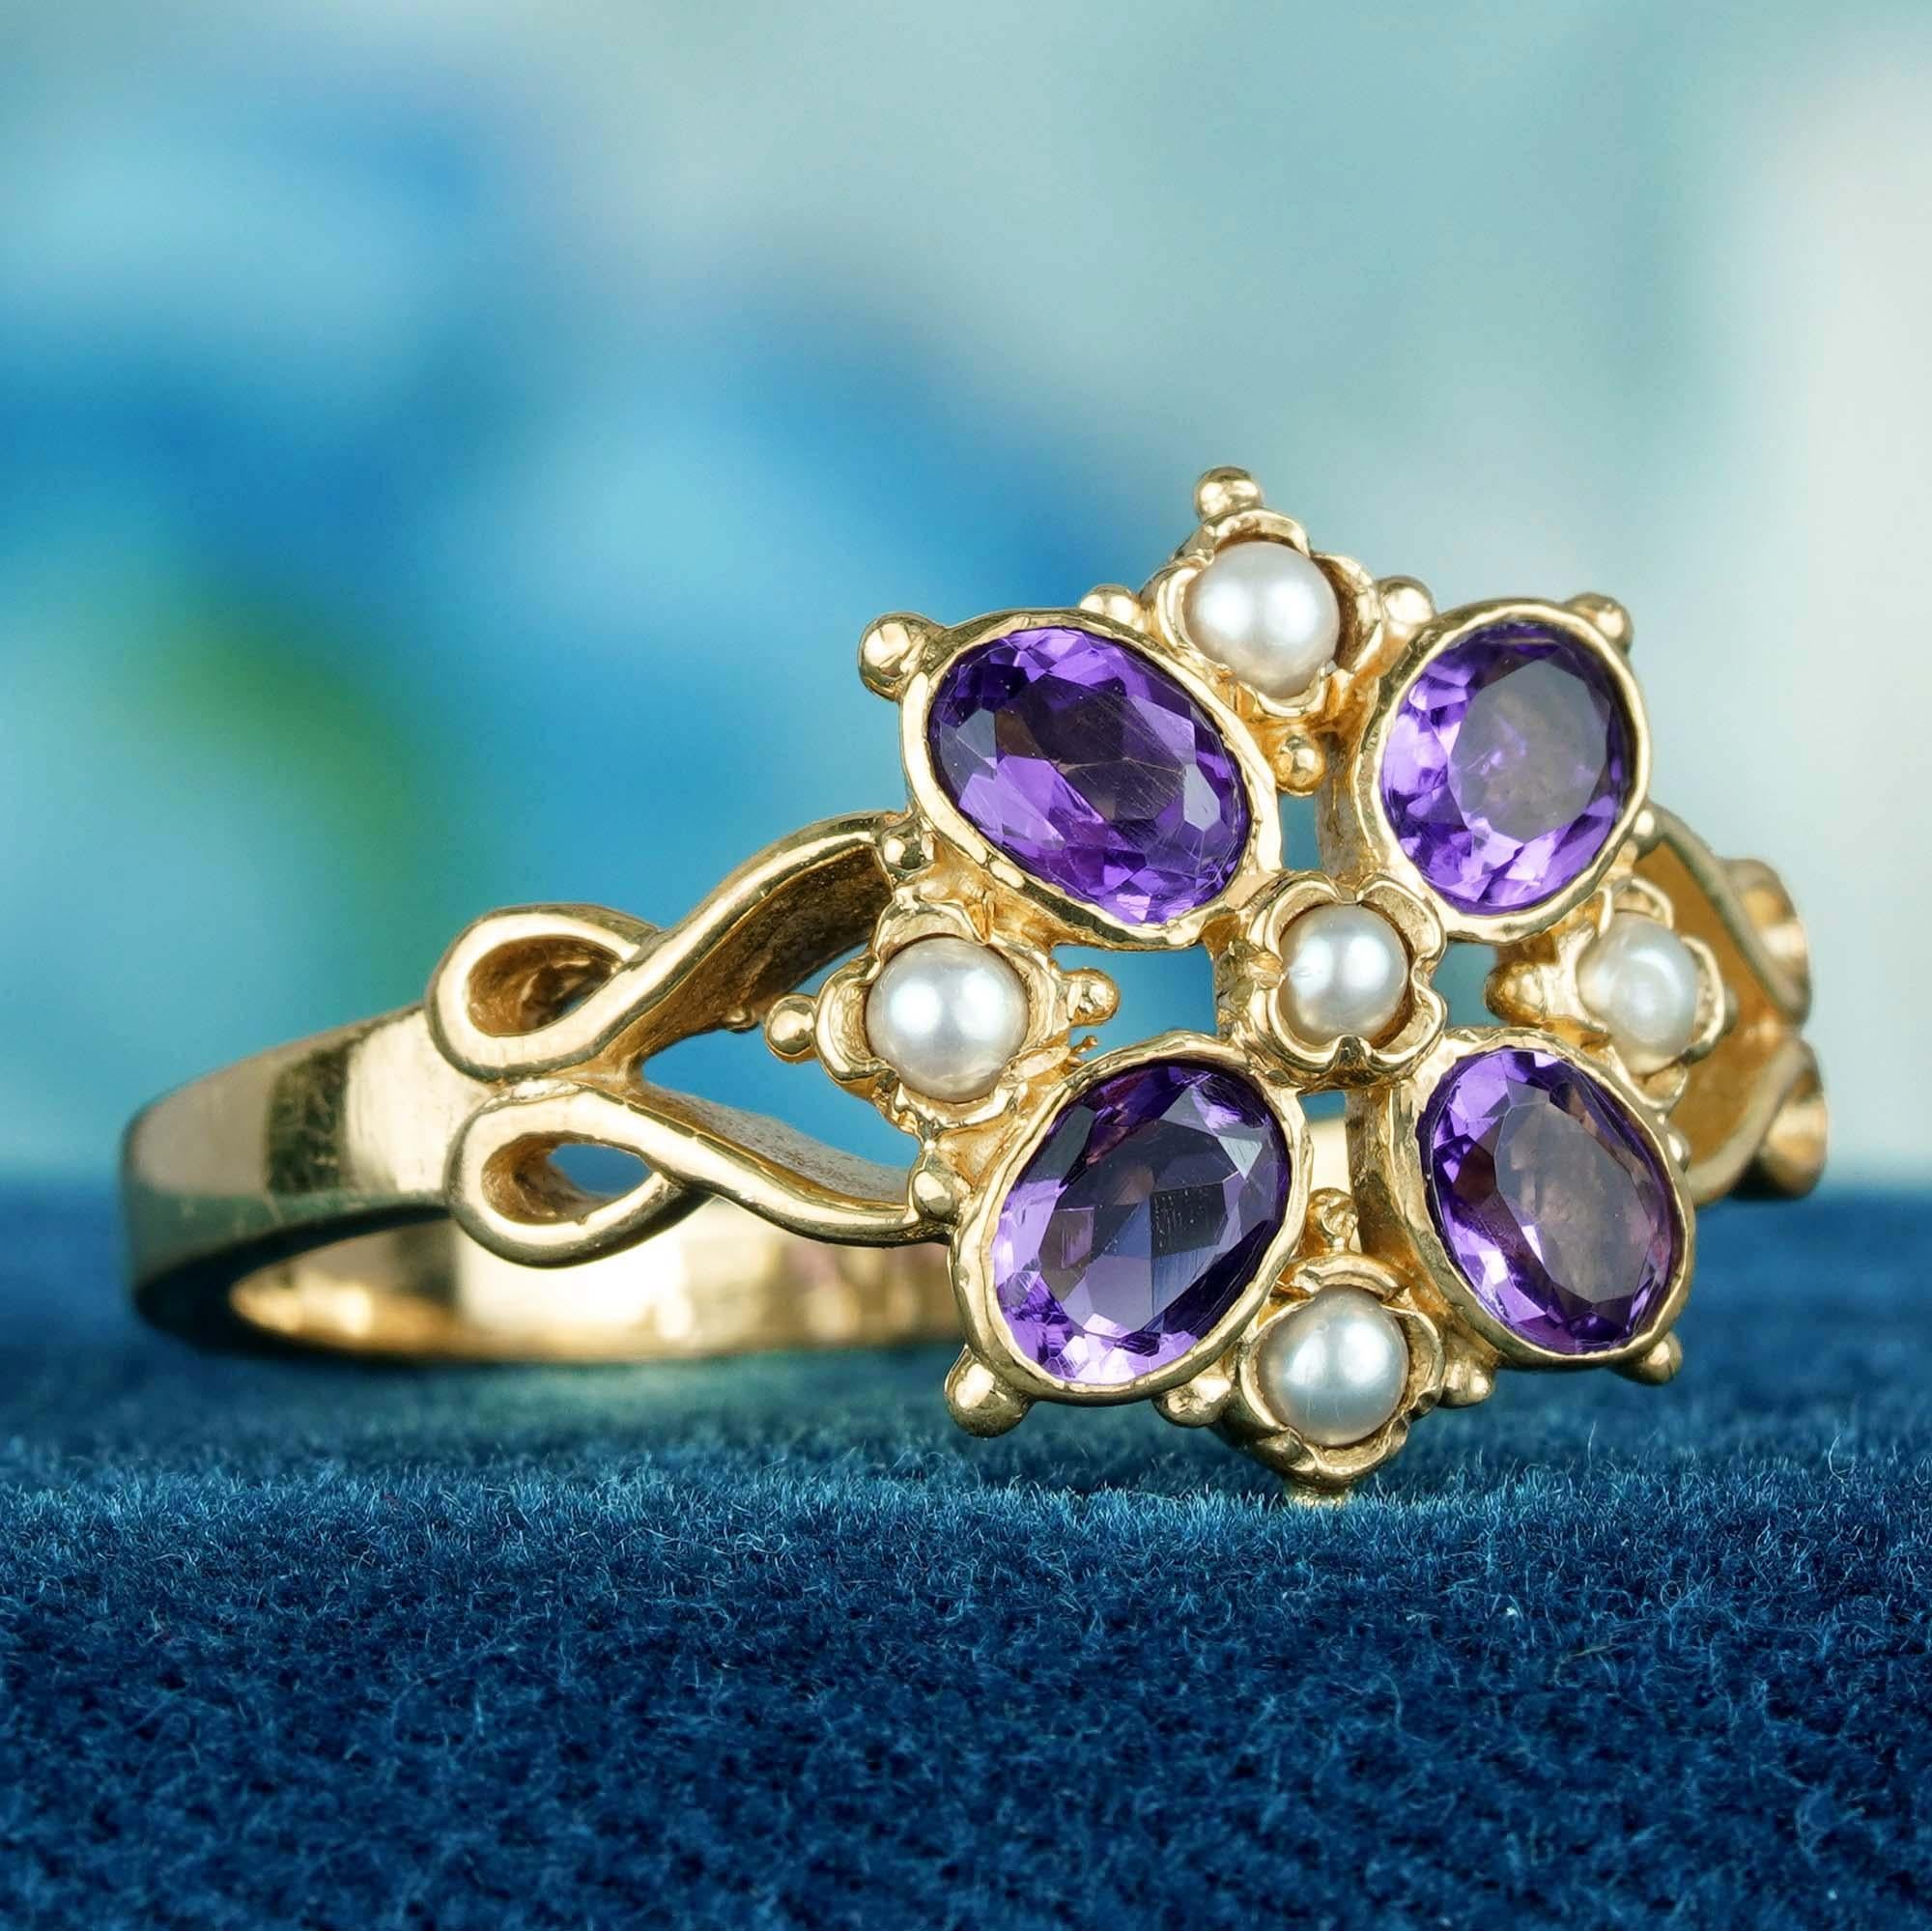 For Sale:  Natural Amethyst and Pearl Vintage Style Floral Cluster Ring in Solid 9K Gold 3